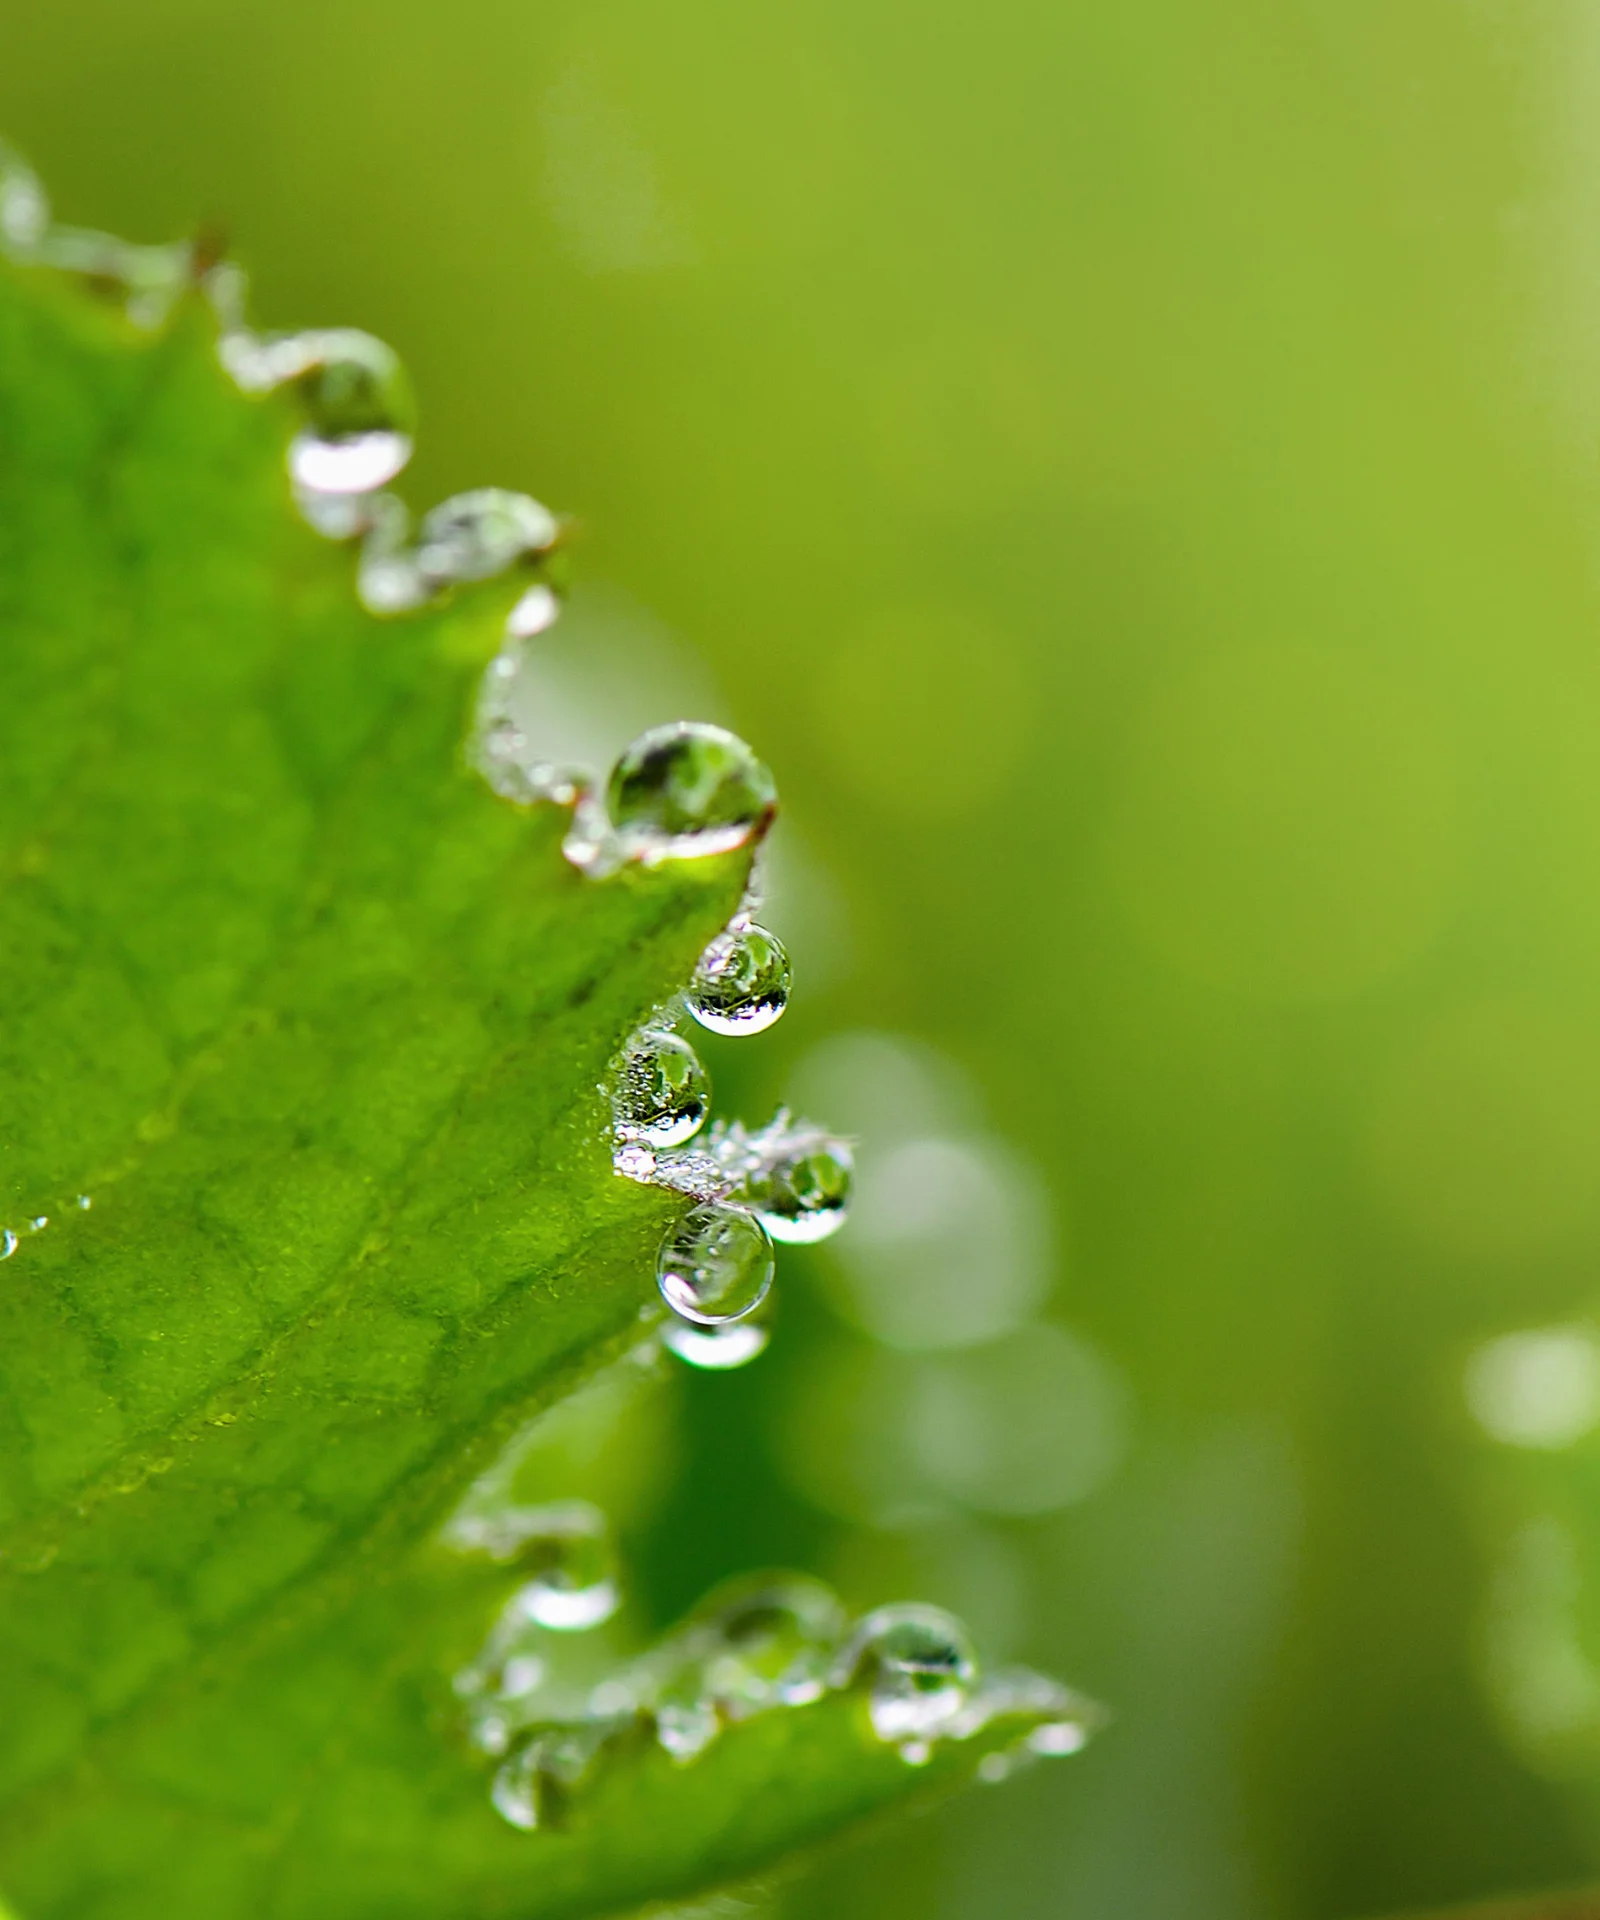 The image presents a close-up view of several water droplets delicately clinging to the edge of a green leaf. The droplets are crystal clear, reflecting light and creating a sense of freshness and purity. The vibrant green background is softly blurred, drawing attention to the intricate details of the droplets and the leaf&#039;s texture. This photograph captures the essence of nature&#039;s beauty and resilience, making it an ideal visual metaphor for green bonds, sustainability initiatives, and environmentally conscious investments. It emphasizes the importance of preserving and nurturing our natural resources for a sustainable future.